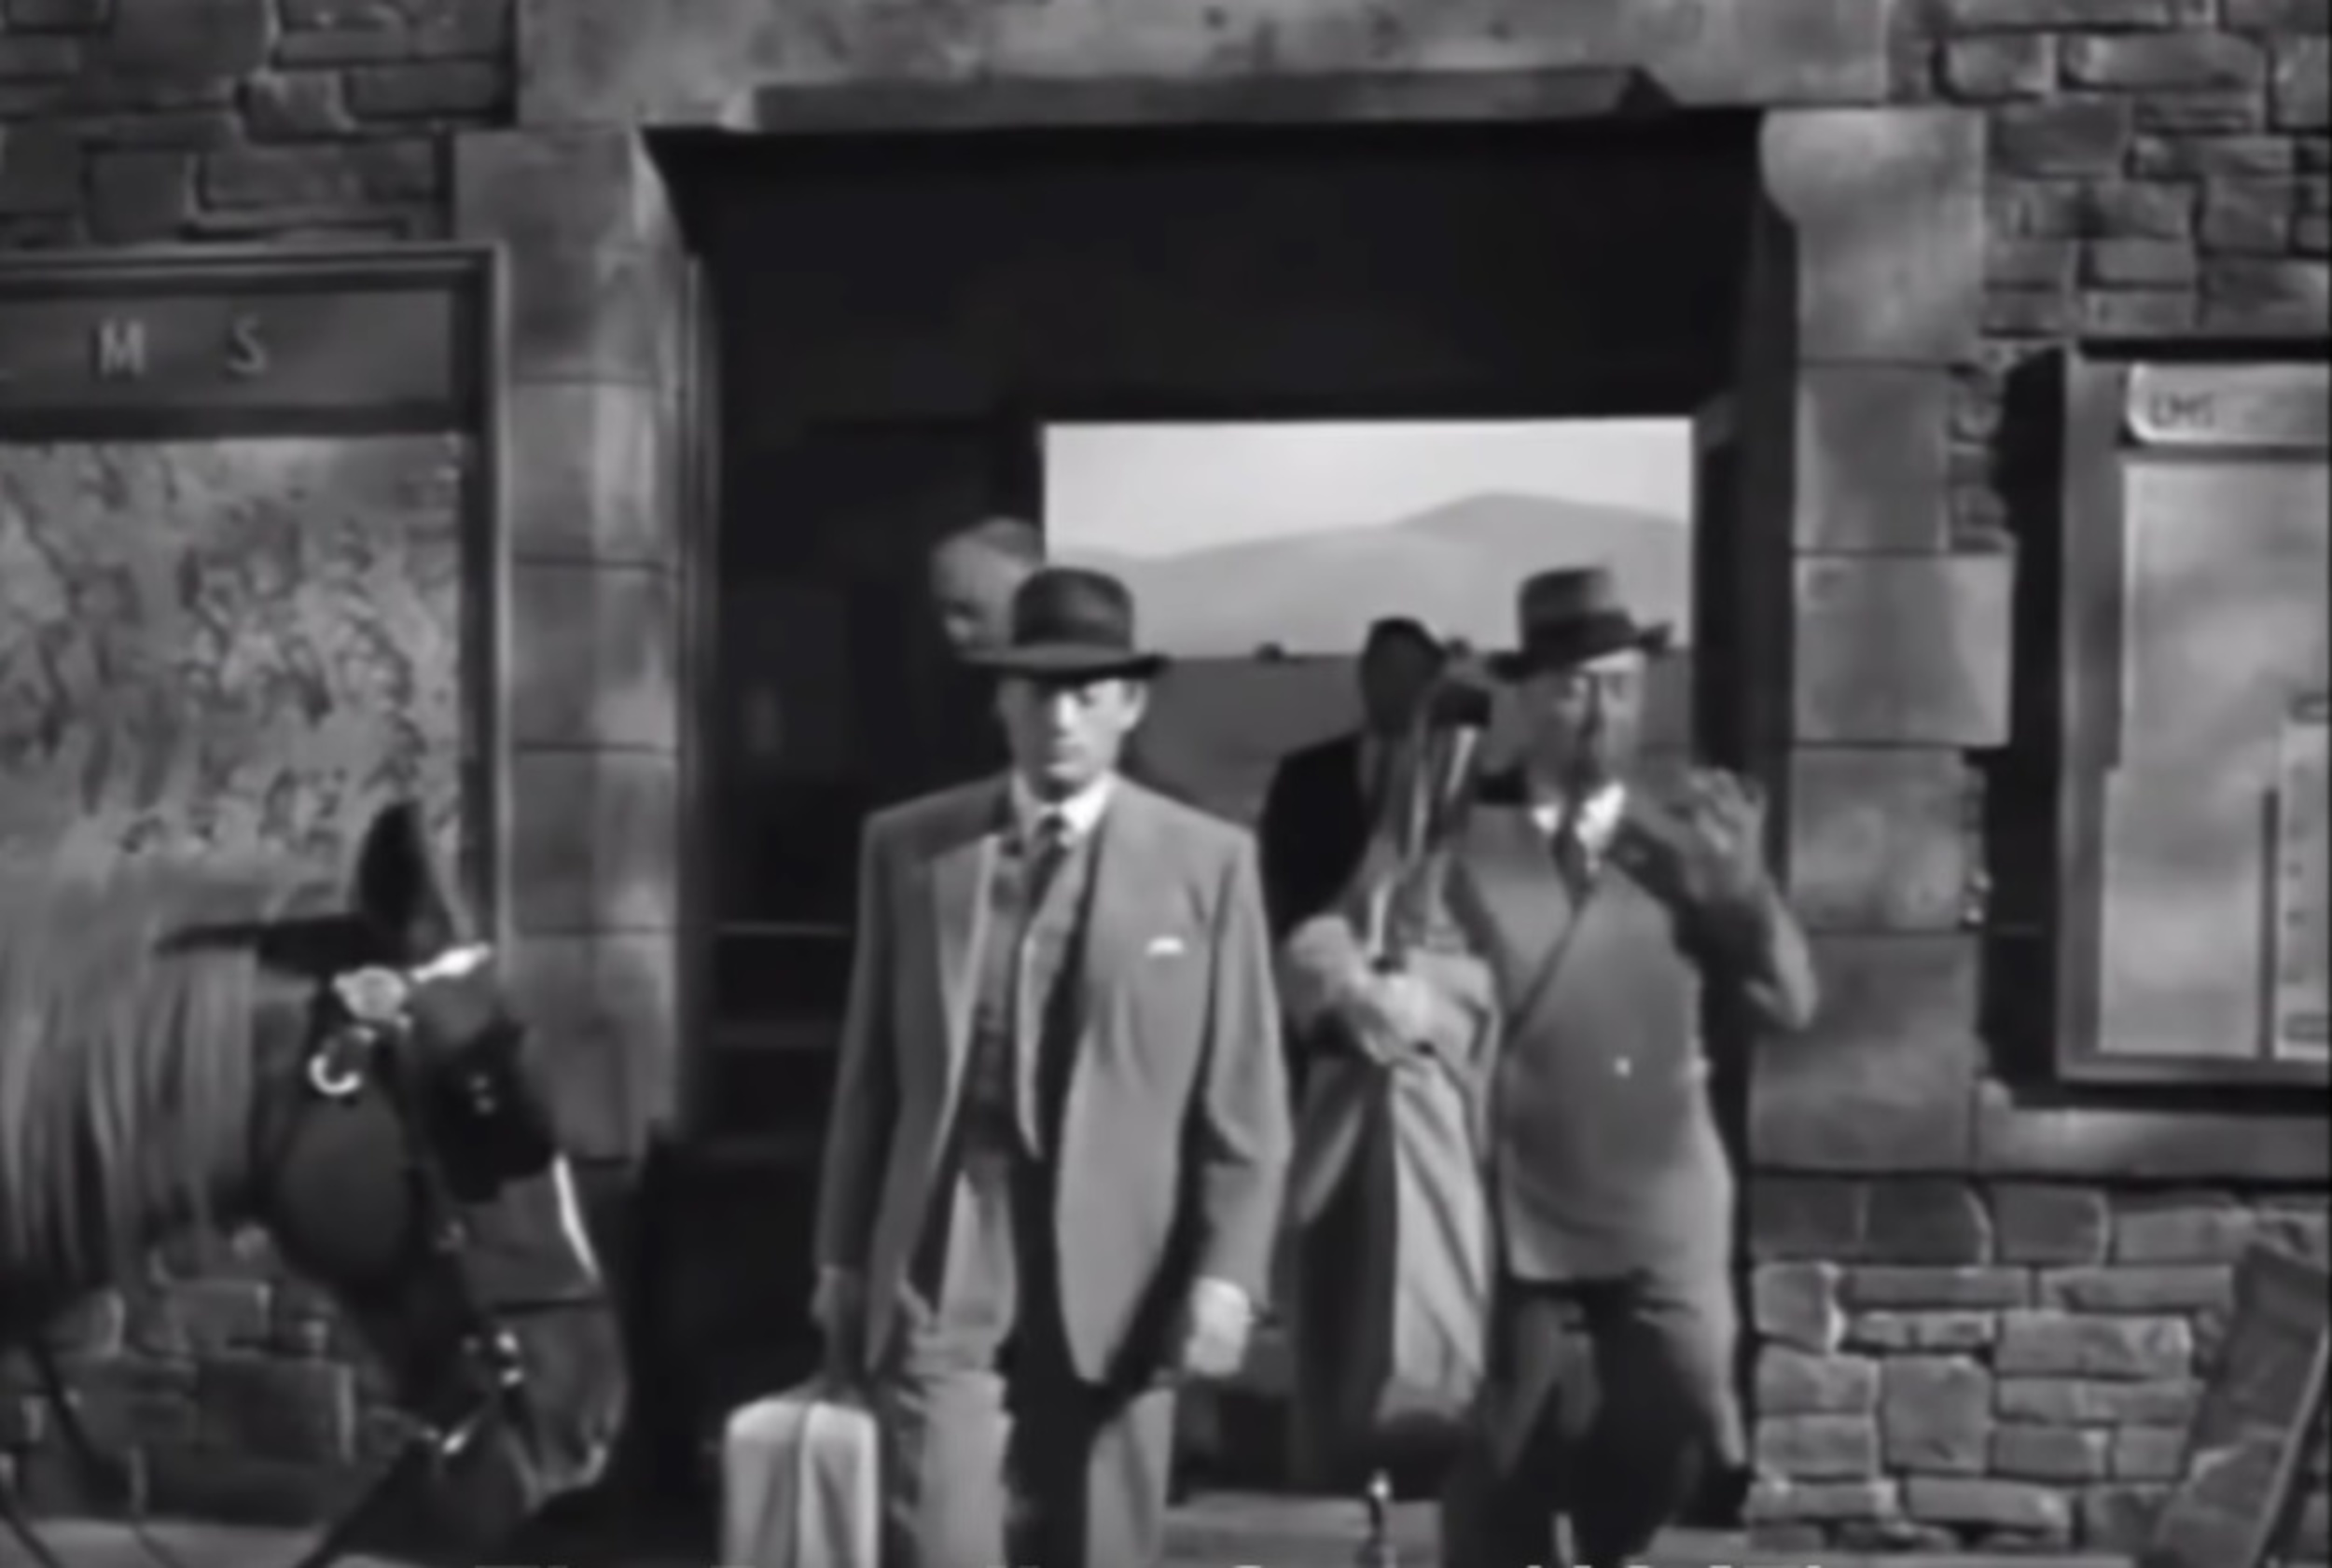 <p>In the middle of a run of iconic films, Hitchcock dropped the somewhat-forgotten “The Paradine Case.” Hey, Gregory Peck is in it! In this movie, he’s carrying a cello while walking behind Peck's character.</p>